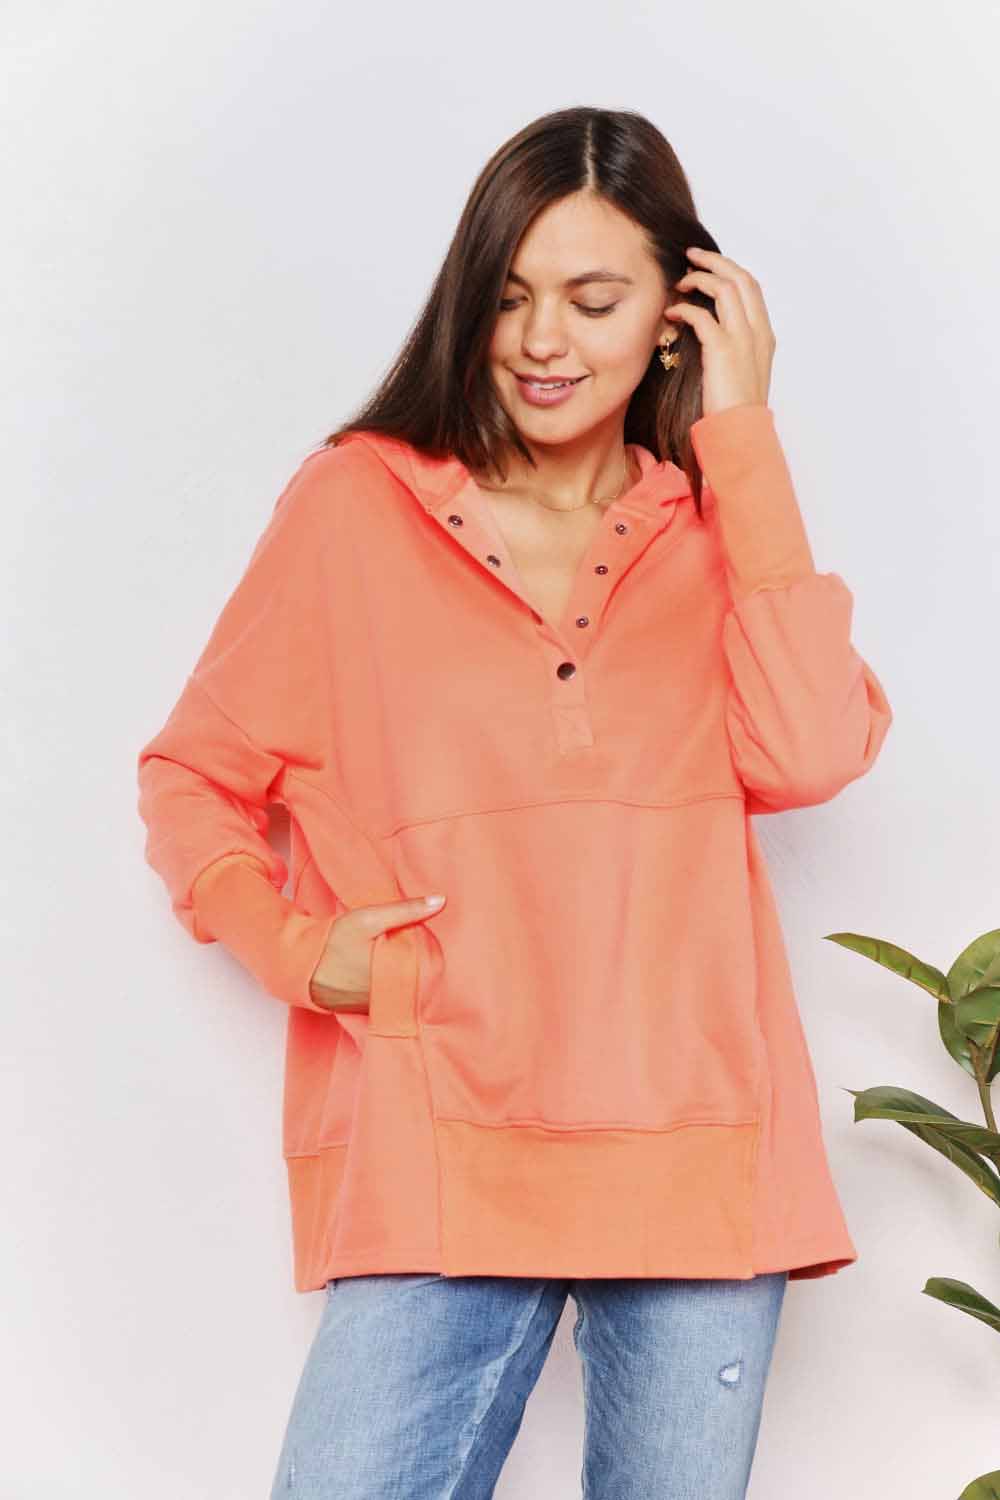 Quarter-Snap Dropped Shoulder Hoodie - Orange / S - Women’s Clothing & Accessories - Shirts & Tops - 1 - 2024